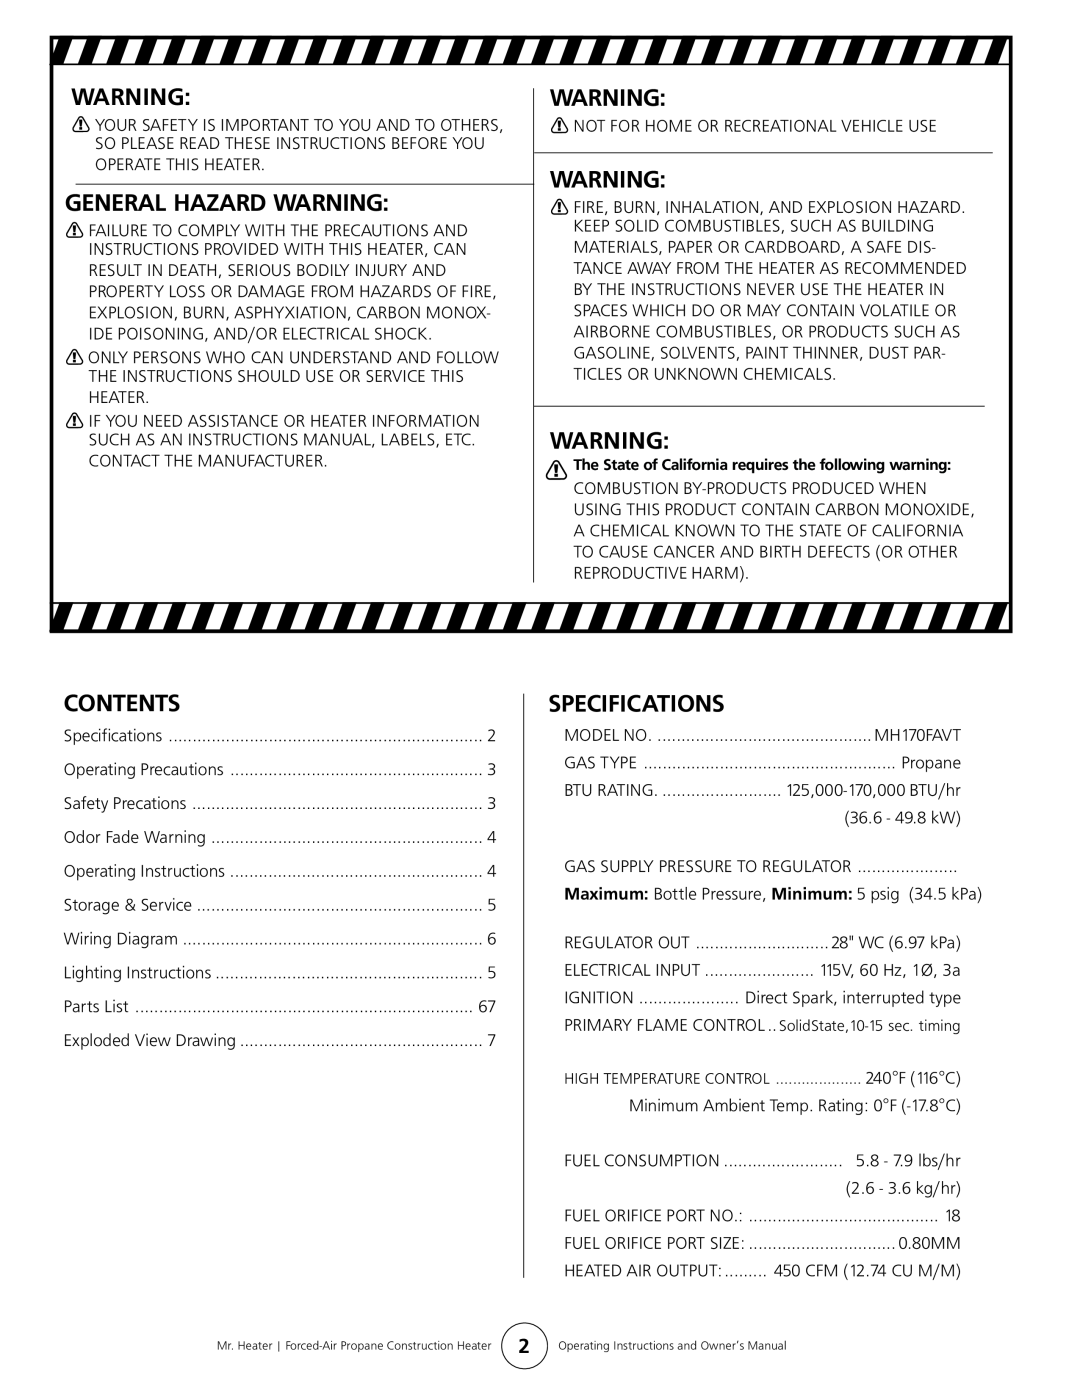 Enerco MH170FAVT owner manual General Hazard Warning, Contents, Specifications 